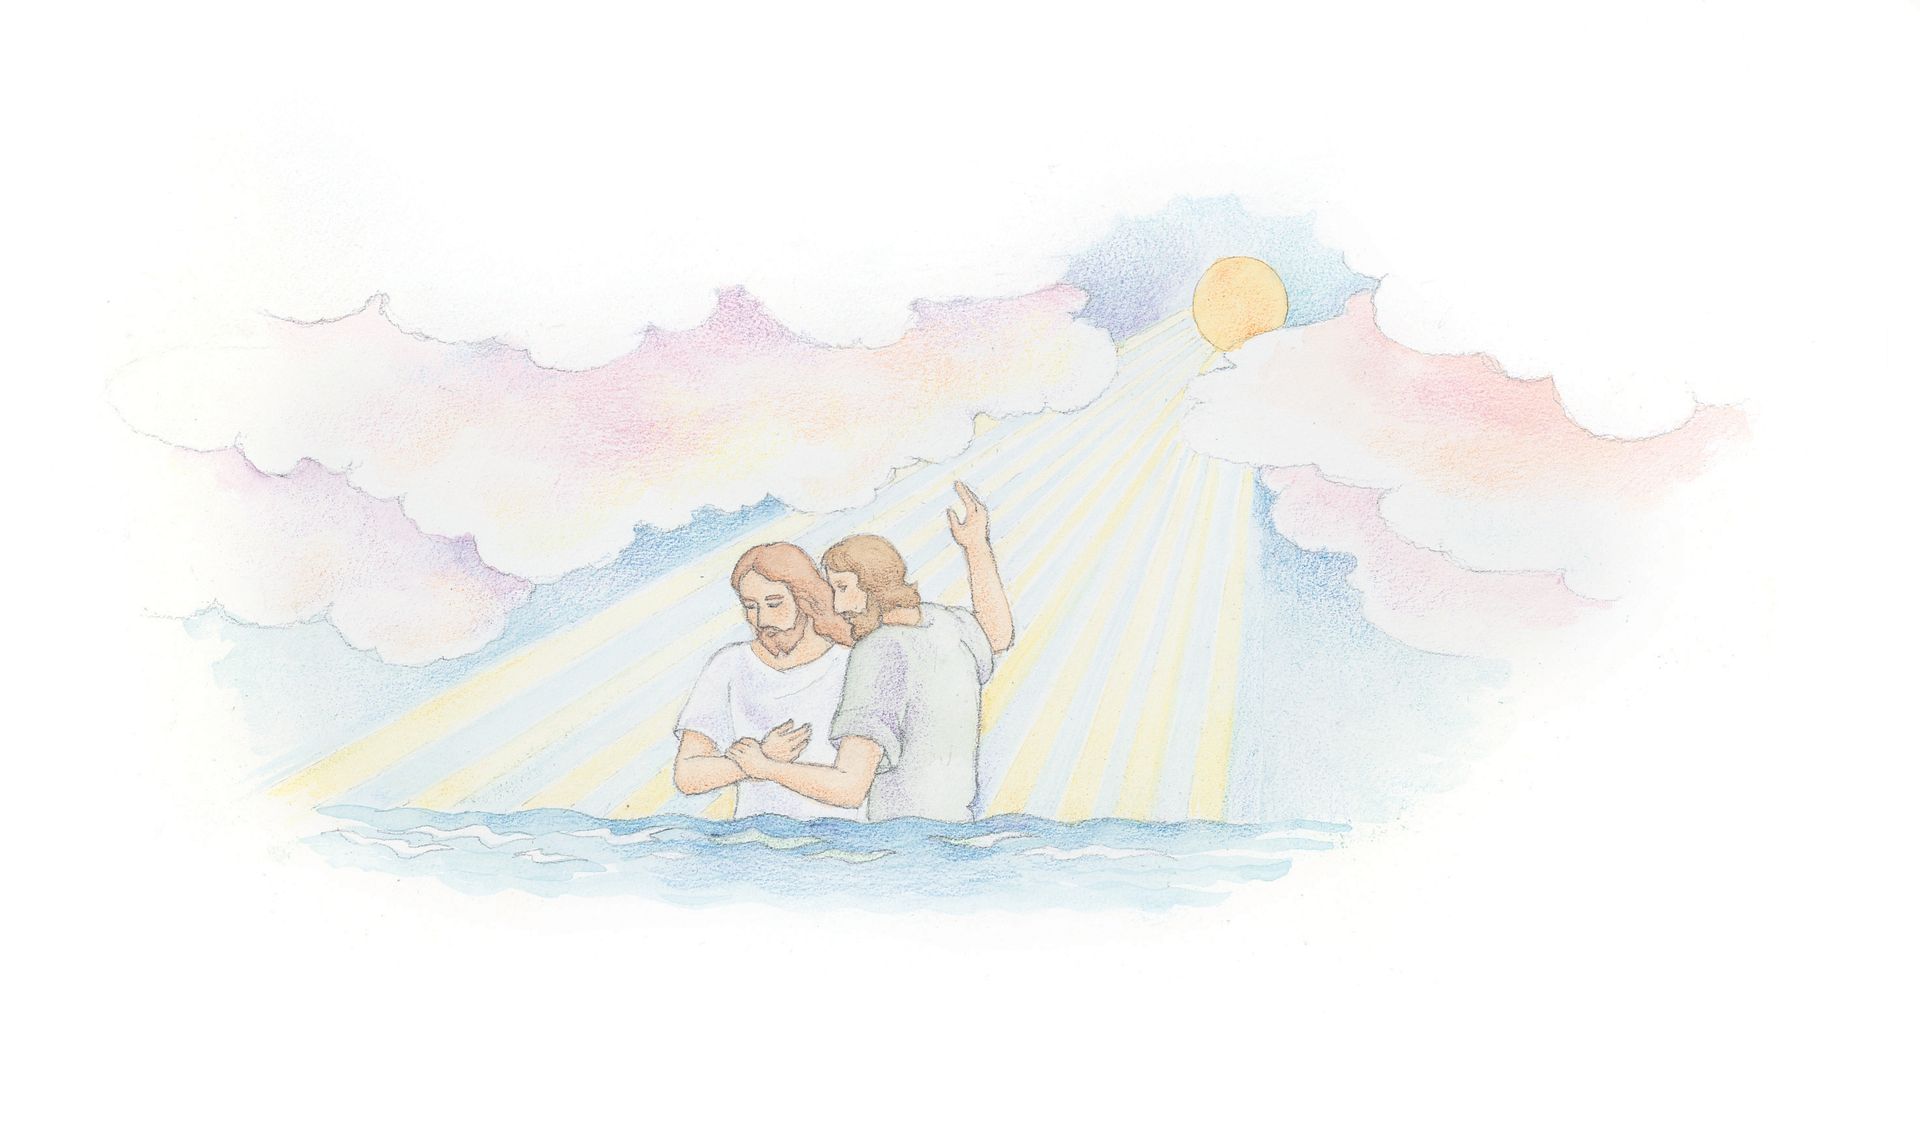 Jesus being baptized in the River Jordan. From the Children’s Songbook, page 102, “When Jesus Christ Was Baptized”; watercolor illustration by Phyllis Luch.